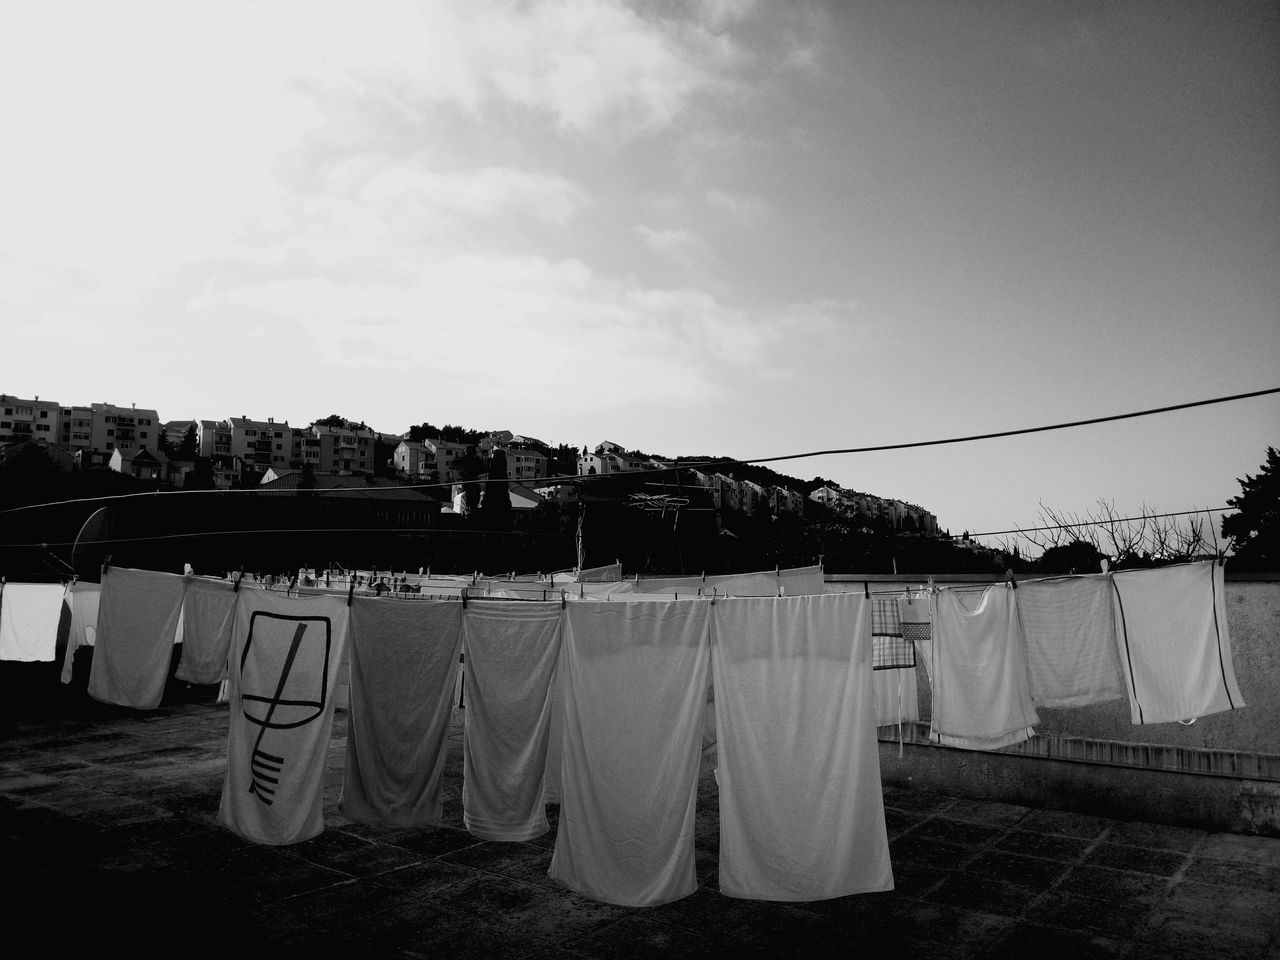 CLOTHES DRYING ON CLOTHESLINE